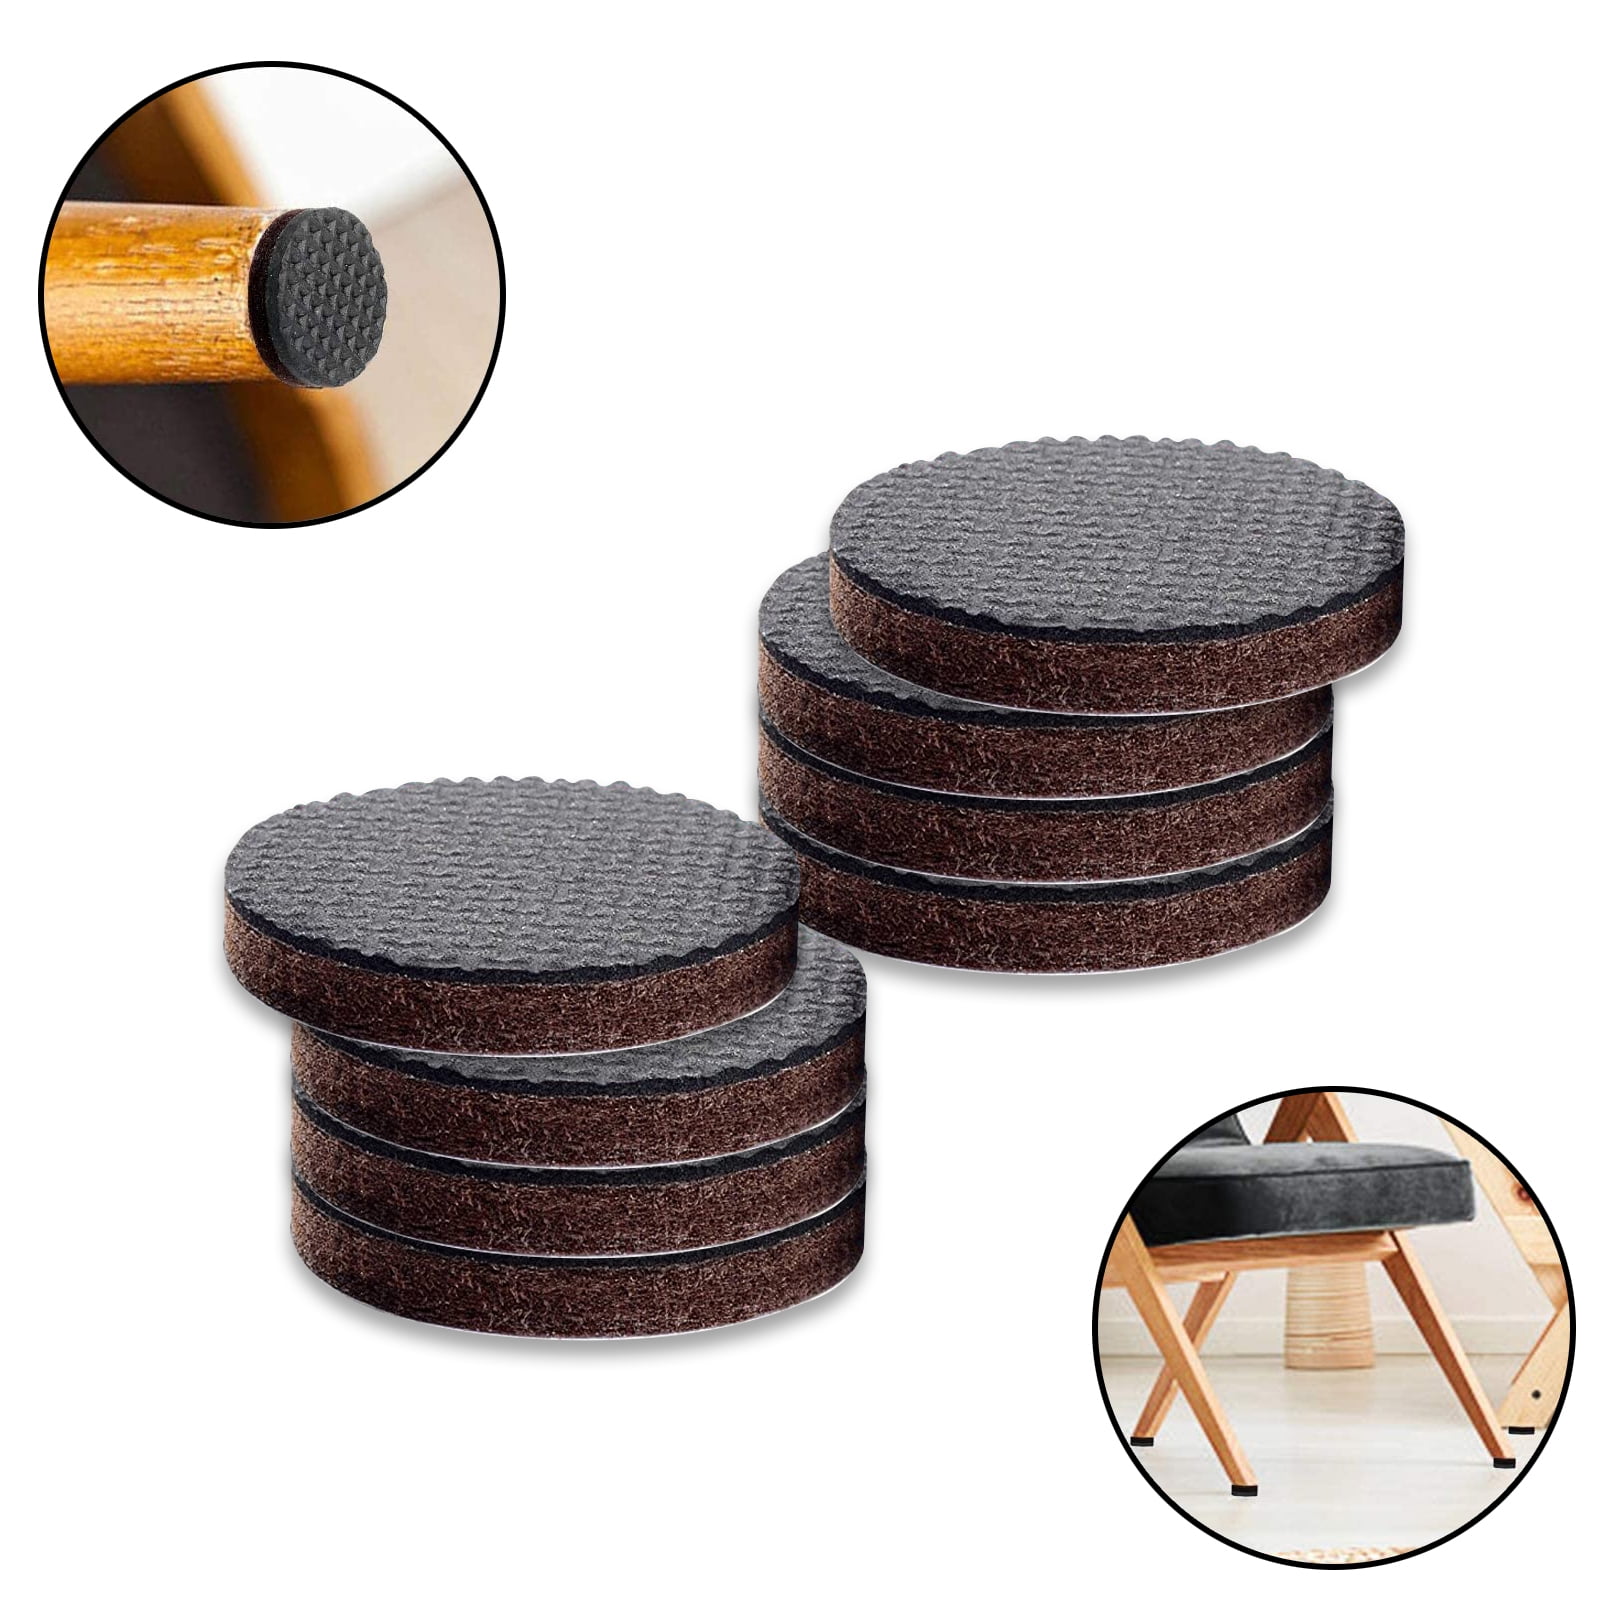 Furniture Pads,8 Pcs 3.5 Inch Rubber Non Slip Coasters Hardwood Floor  Protectors for Furniture Legs Sofa Bed Piano Chair Feet Prevent Sliding  Stoppers